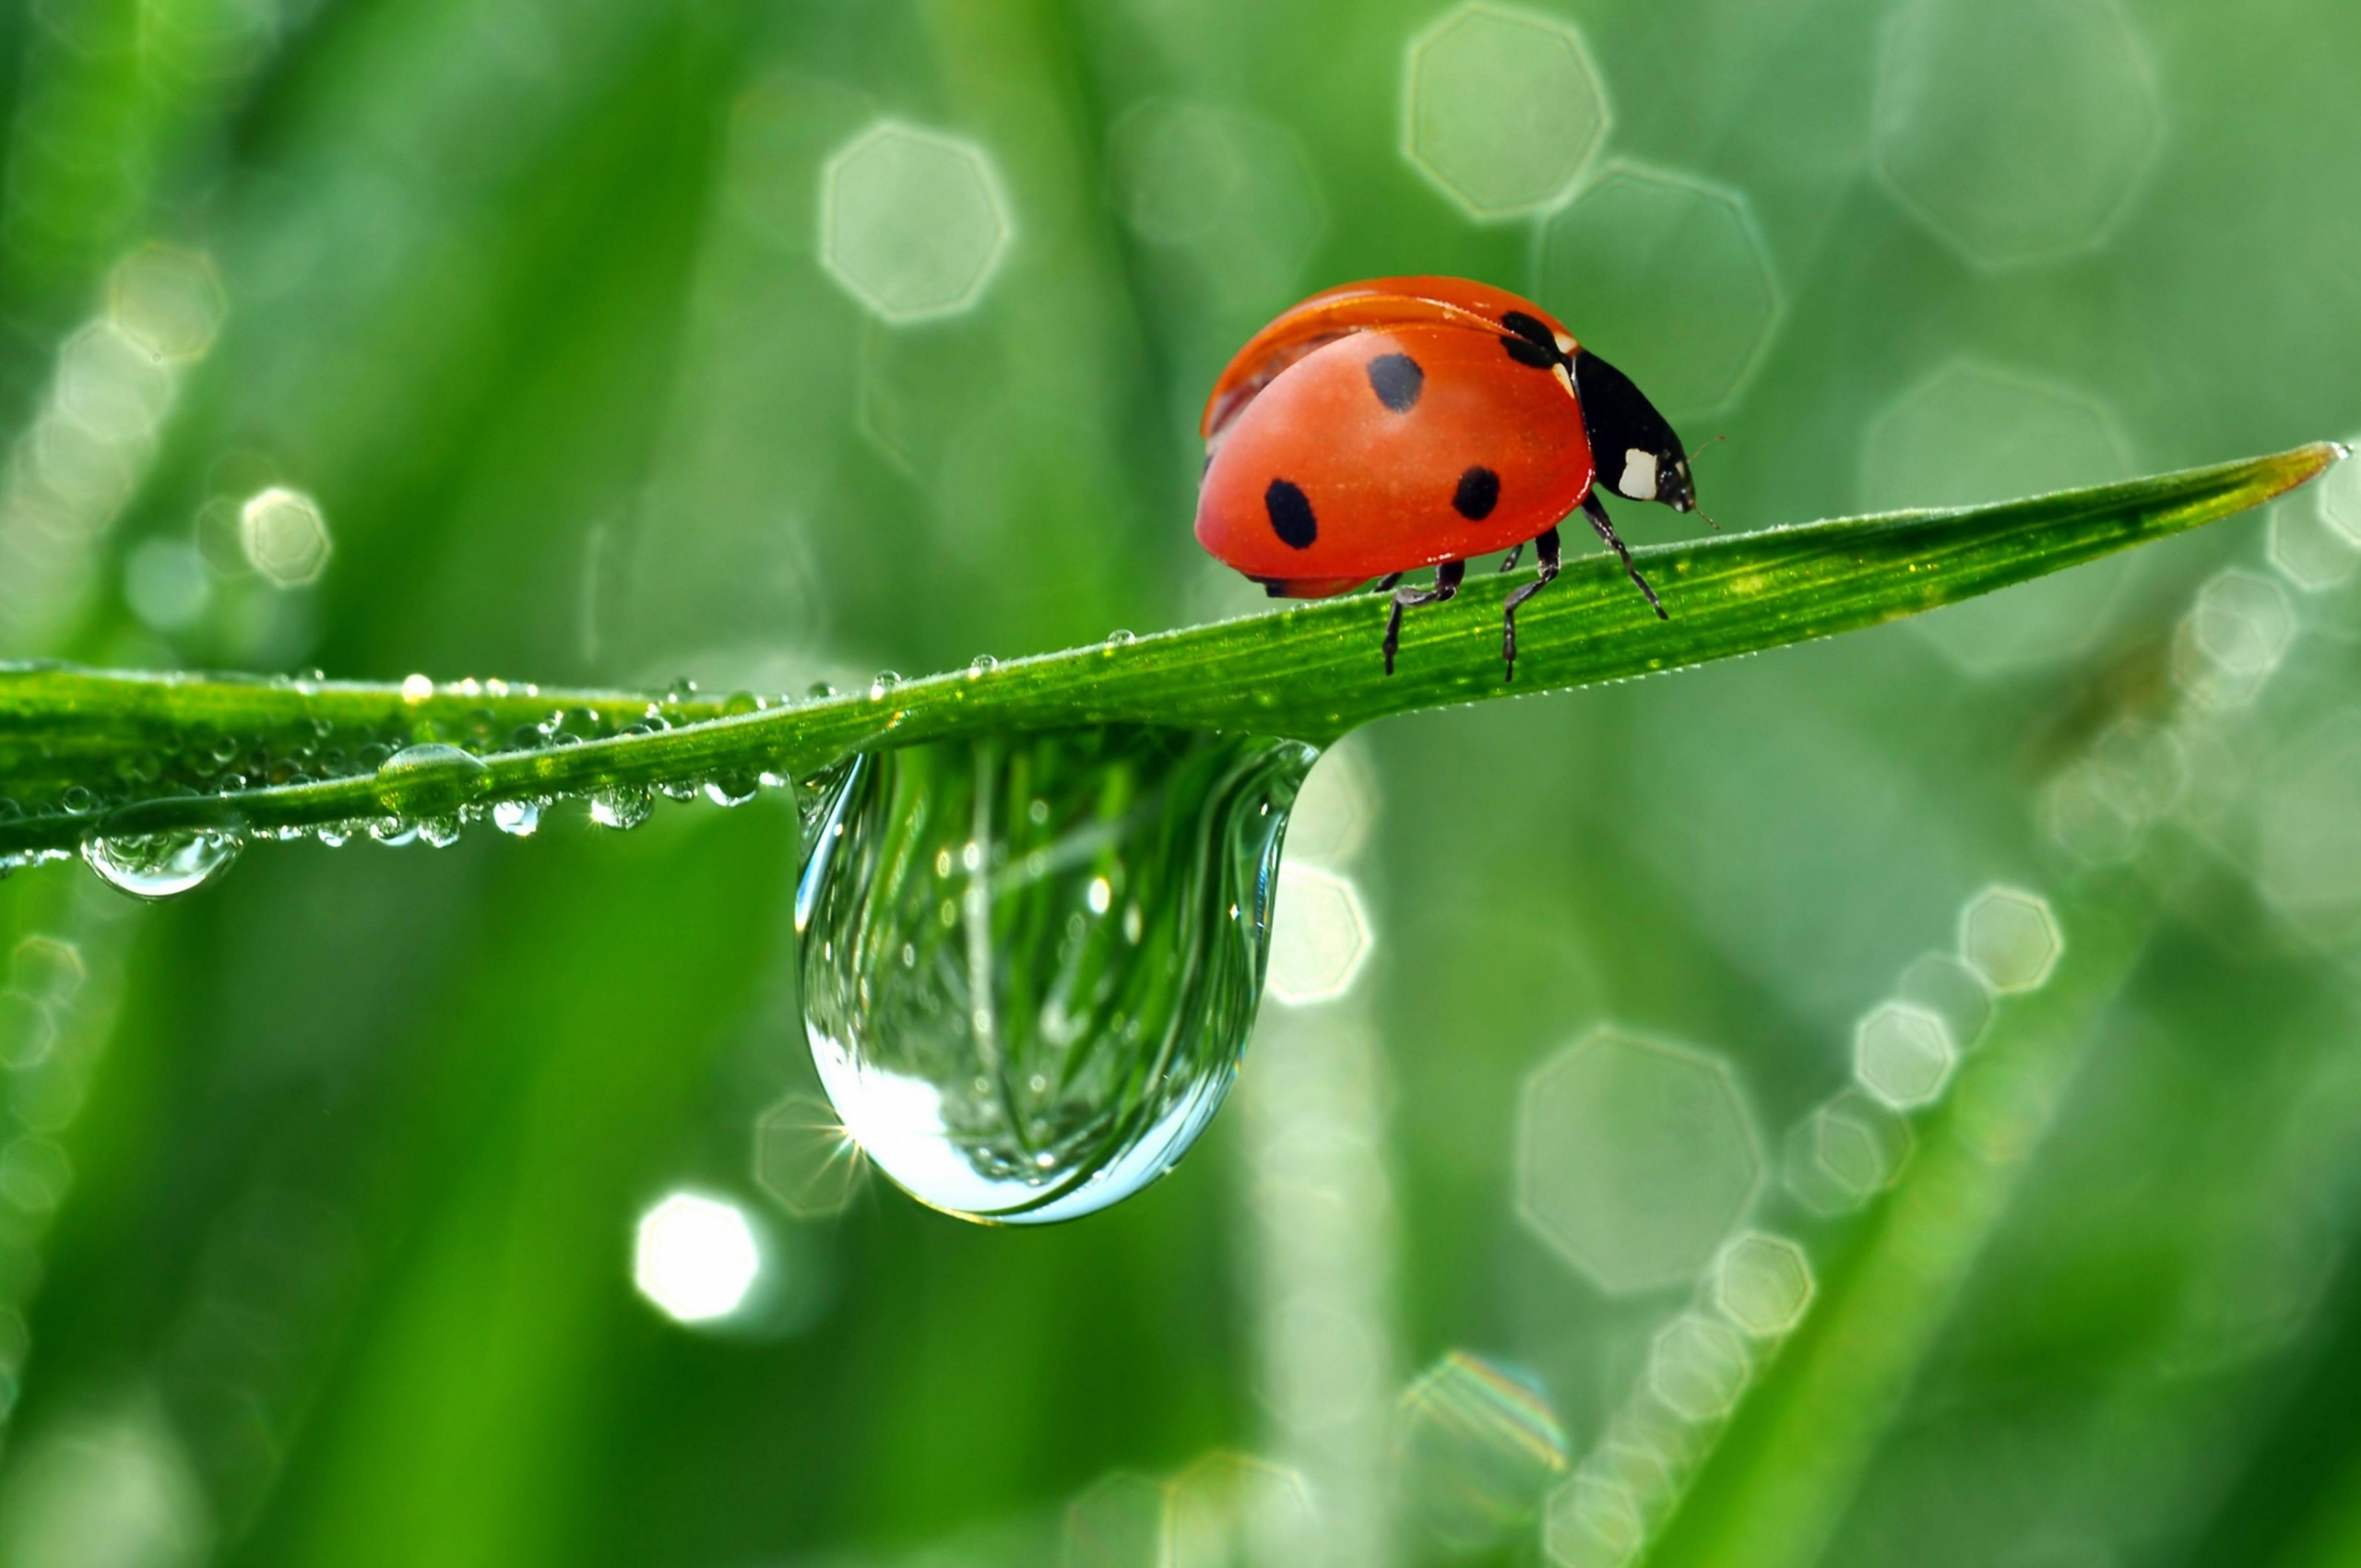 10 Lovely Hd Ladybug Wallpapers Hdwallsourcecom - Ladybird Wallpaper Hd , HD Wallpaper & Backgrounds